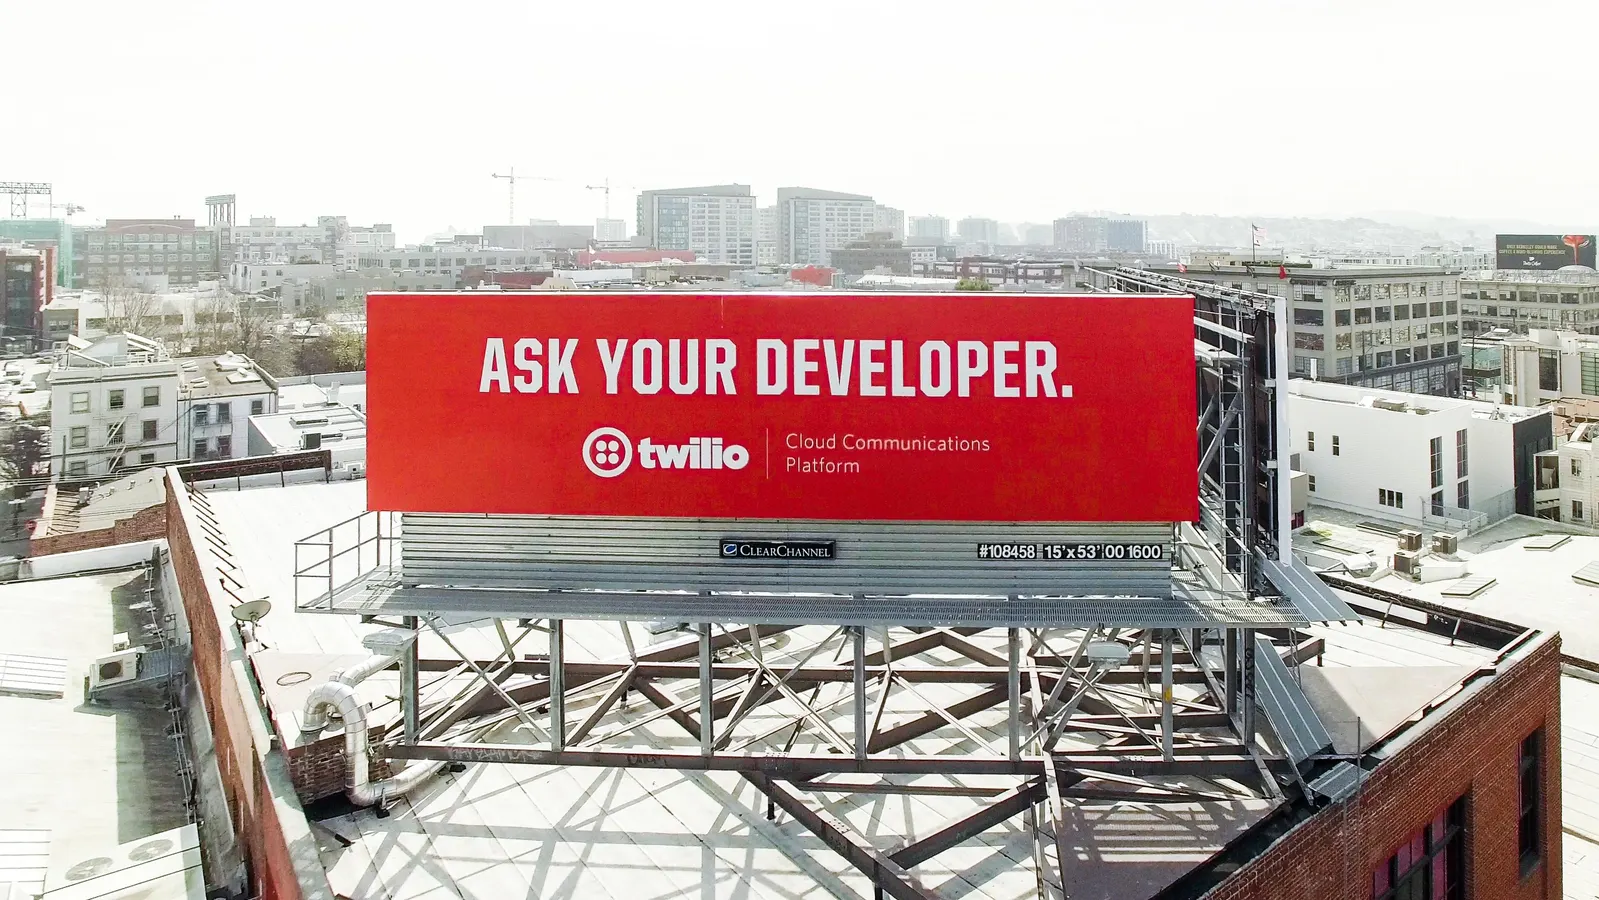 twilio billboard with the text: 'Ask your developer.'